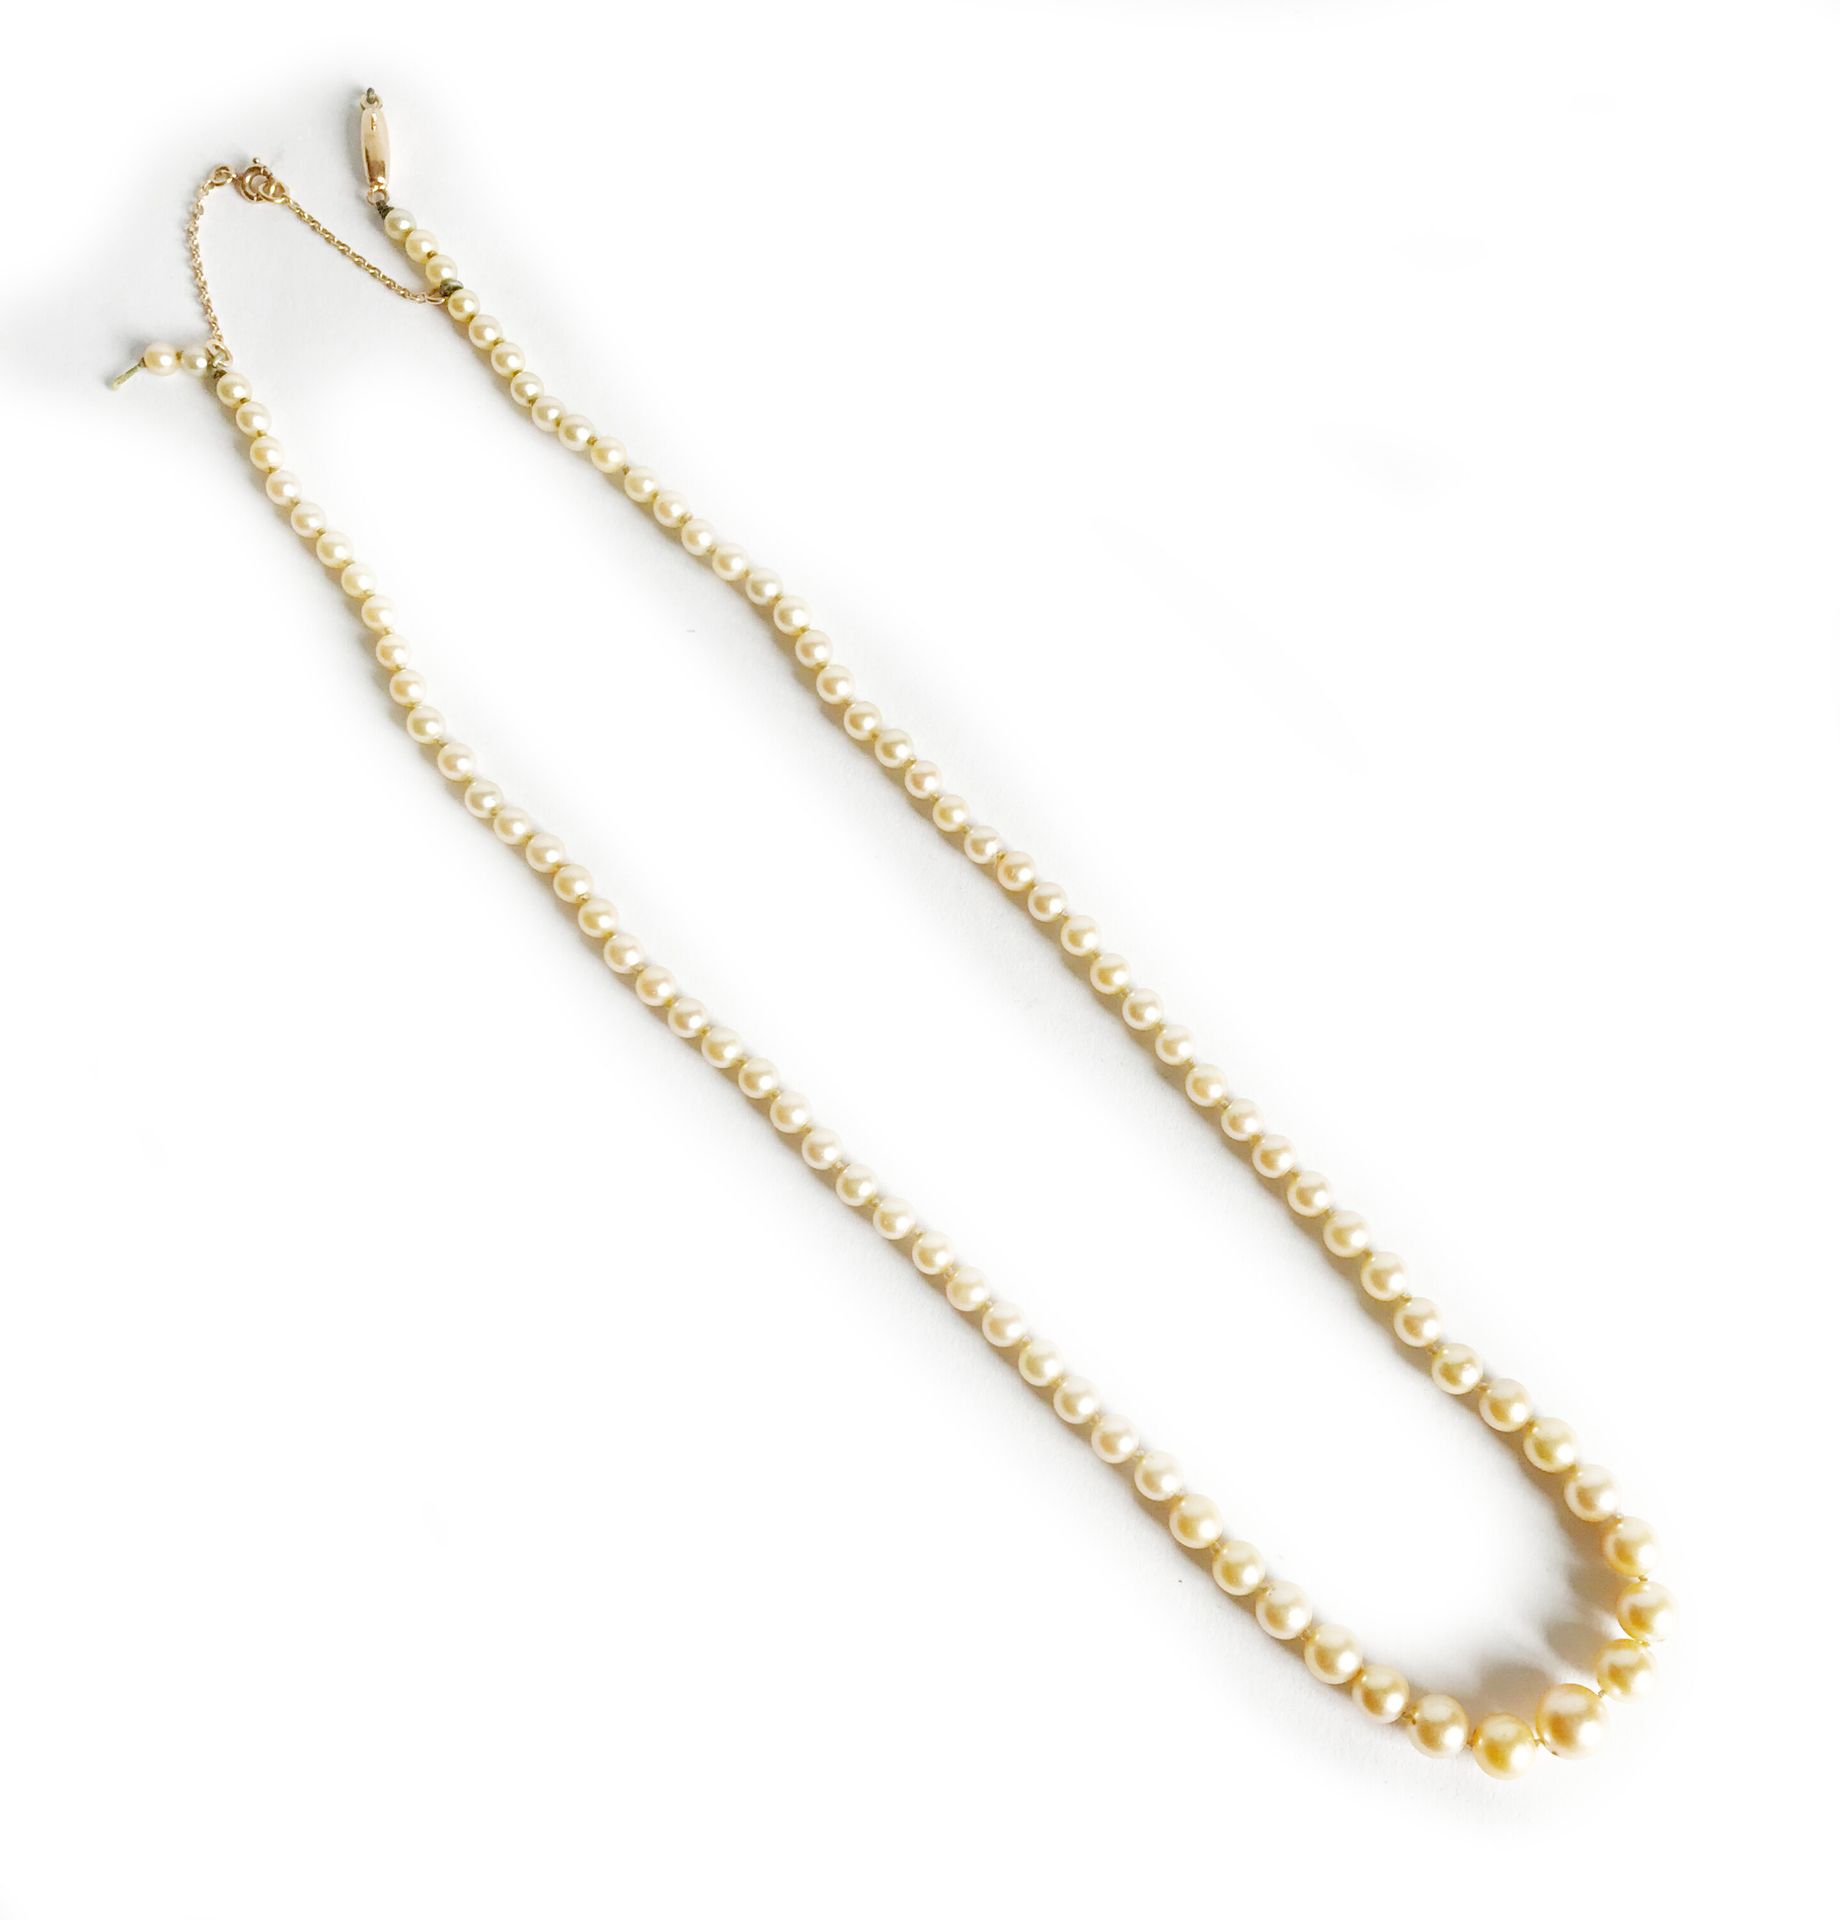 Null Small necklace of cultured pearls in fall. Gold clasp.

Broken